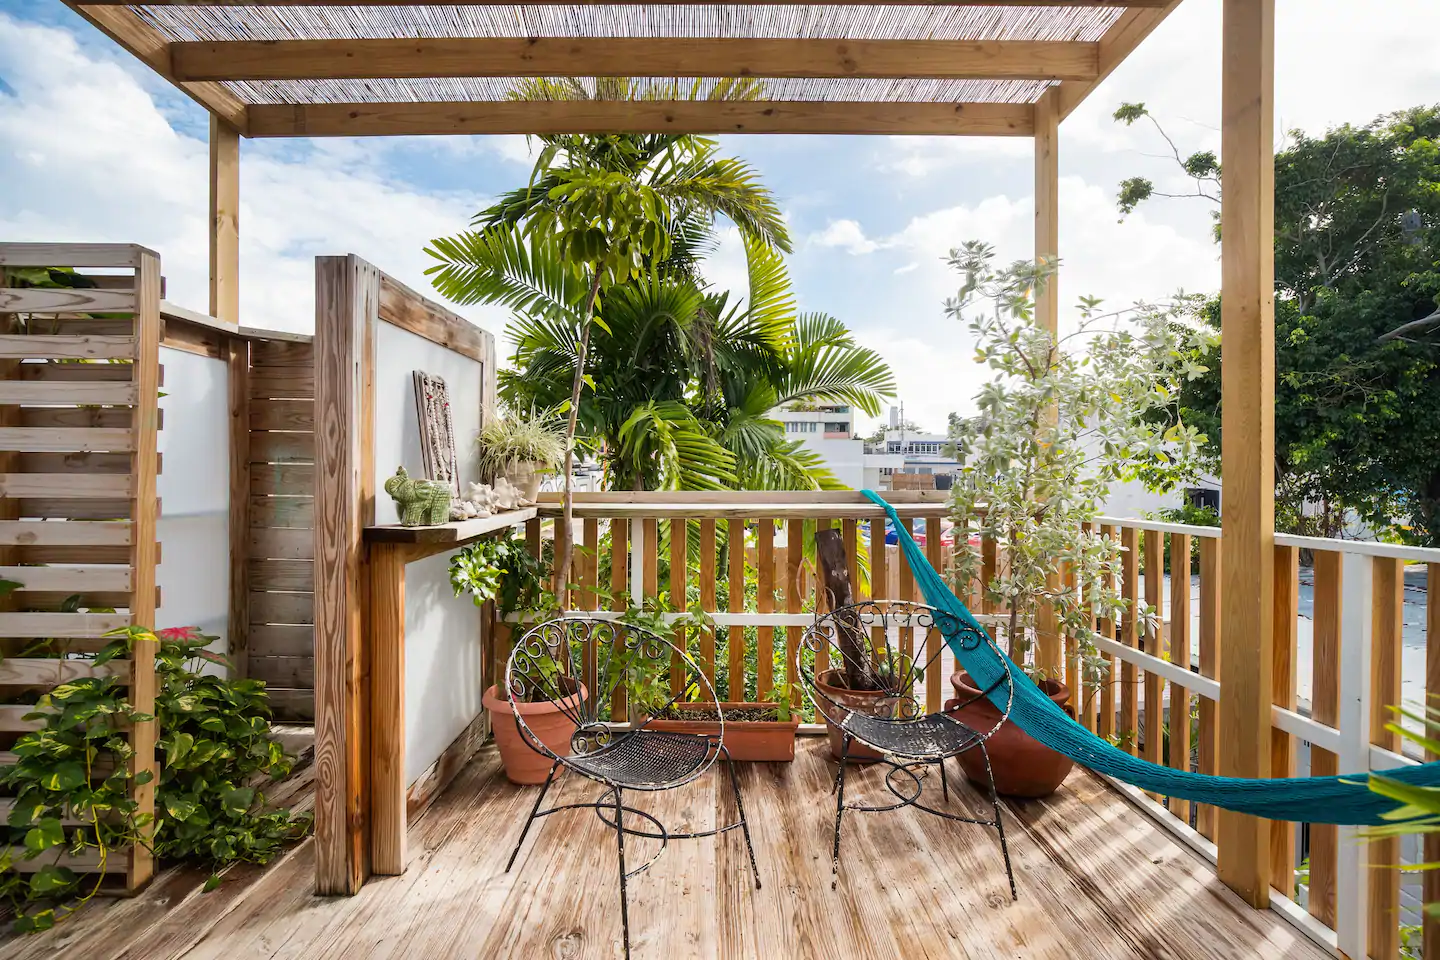 Treehouse at La Botanica - Best Airbnbs in Puerto Rico